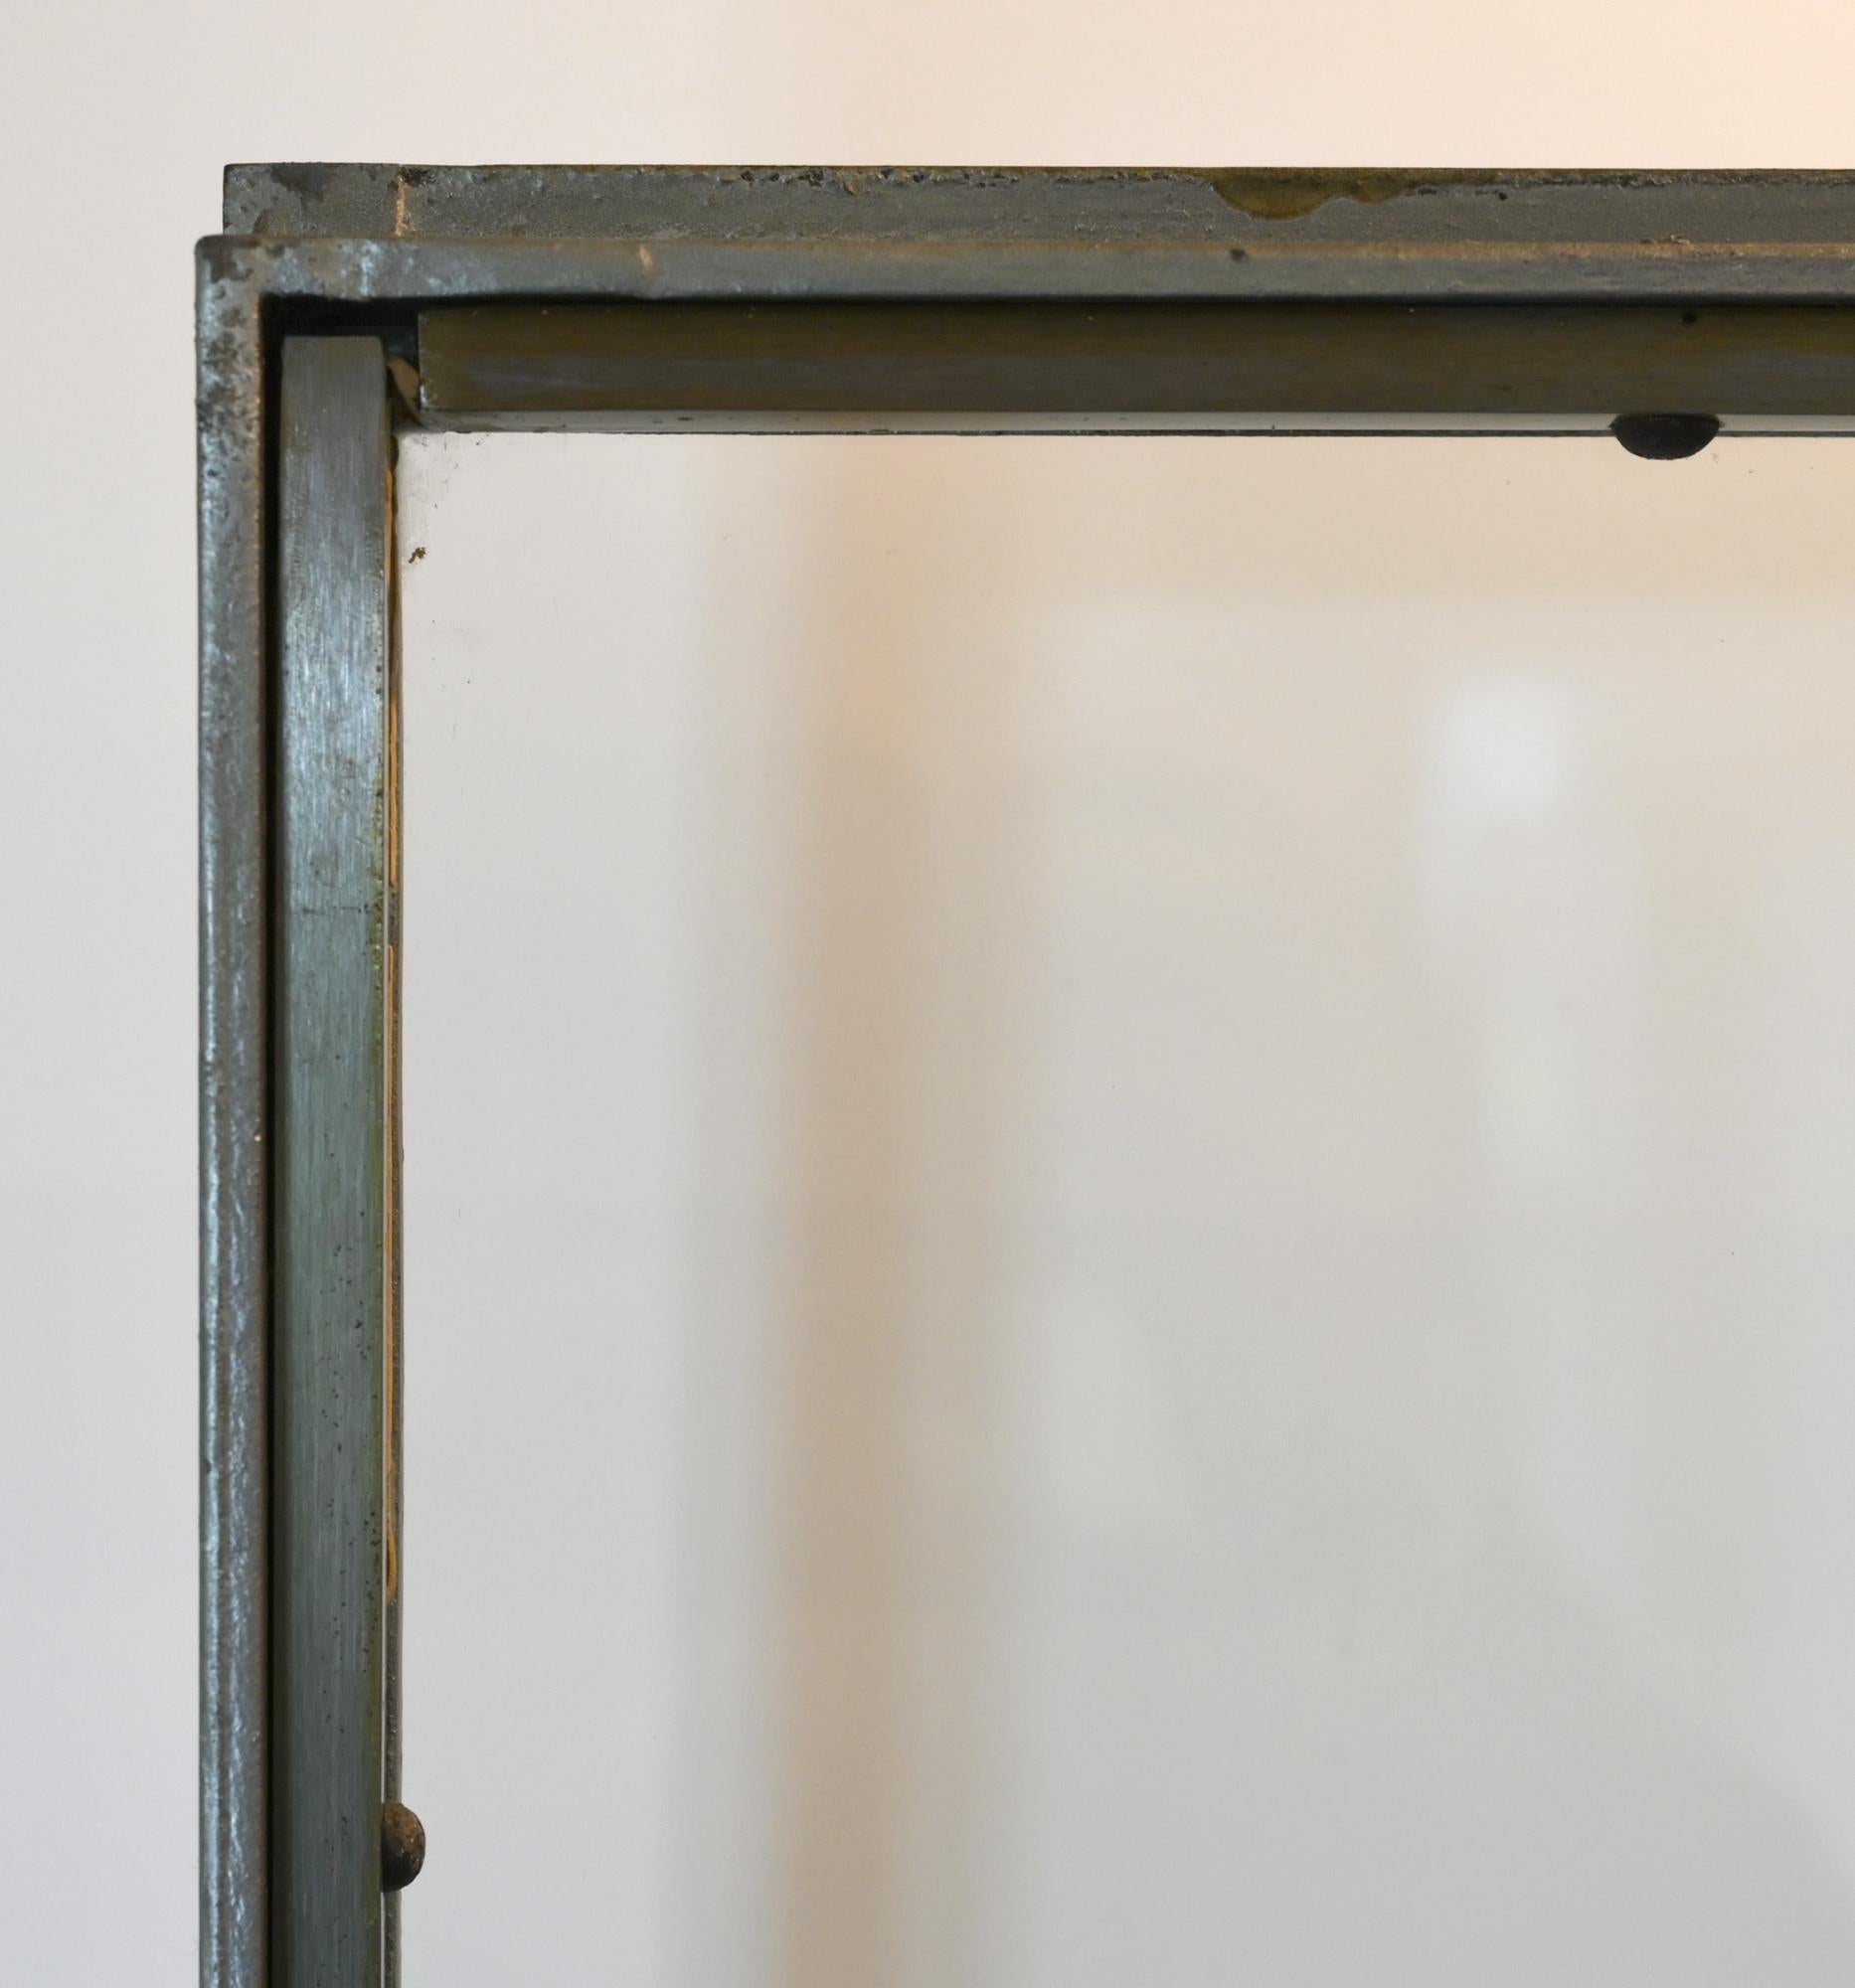 Exhibition Showcase, One of Two Museum Showcase Iron Vitrine, Italy, 1920-1930 In Good Condition For Sale In Epfach, DE